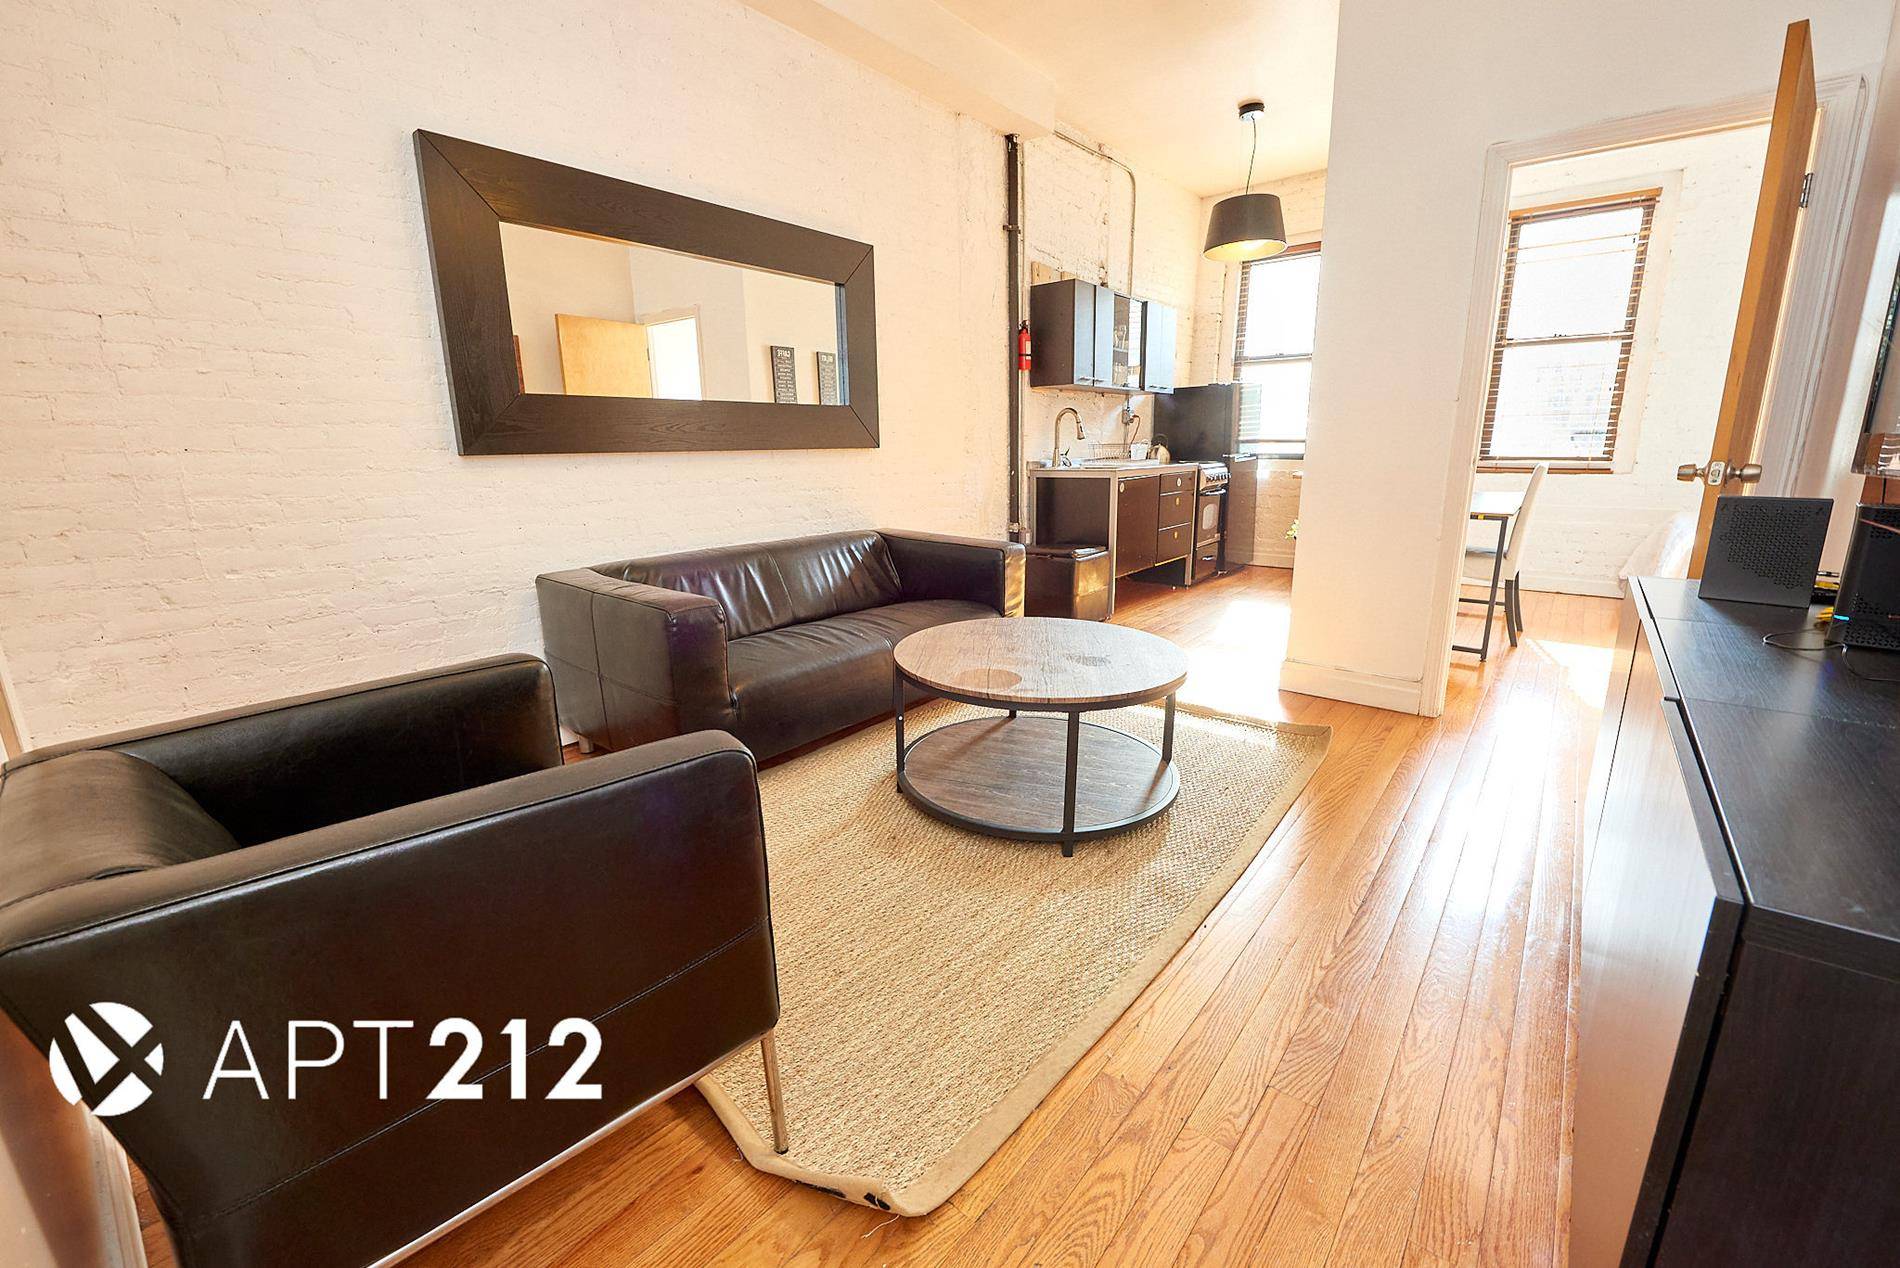 Beautiful loft like 3 bedroom In Nolita with a very private terrace.